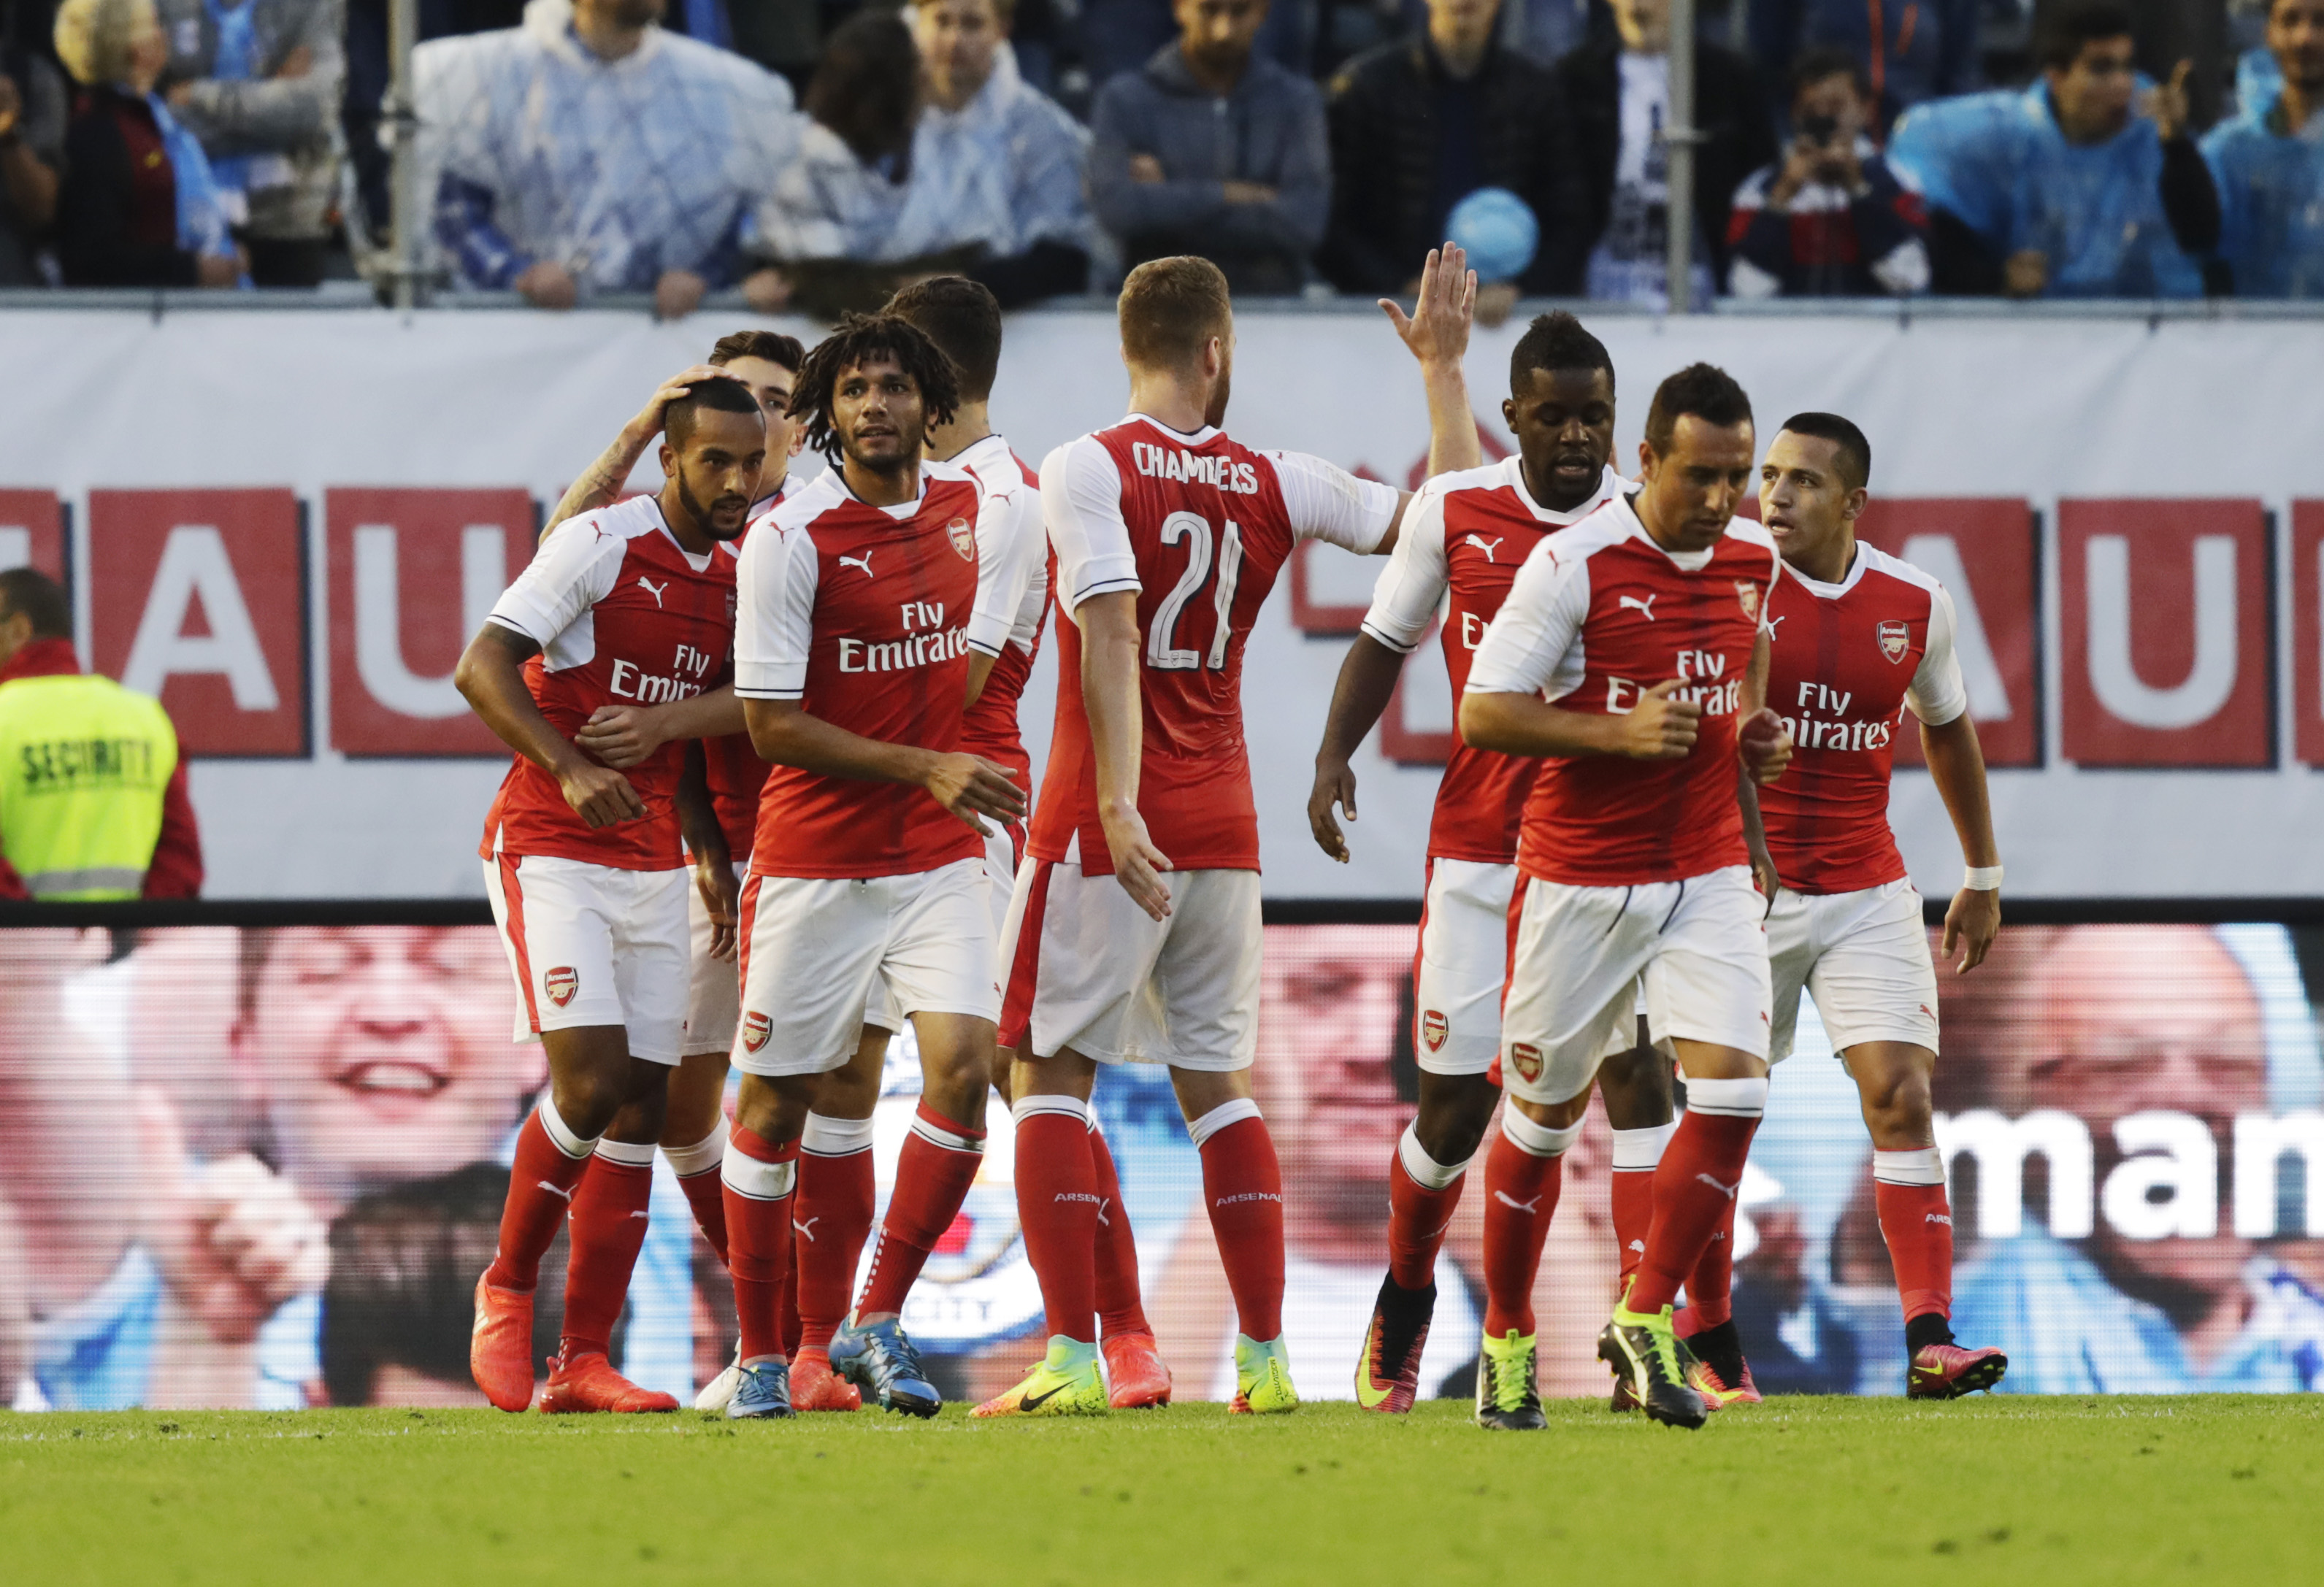 GOTHENBURG, SWEDEN - AUGUST 07: Players of Arsenal celebrates as Theo Walcott of Arsenal has scored to 2-1 during the Pre-Season Friendly between Arsenal and Manchester City at Ullevi on August 7, 2016 in Gothenburg, Sweden. (Photo by Nils Petter Nilsson/Ombrello/Getty Images)